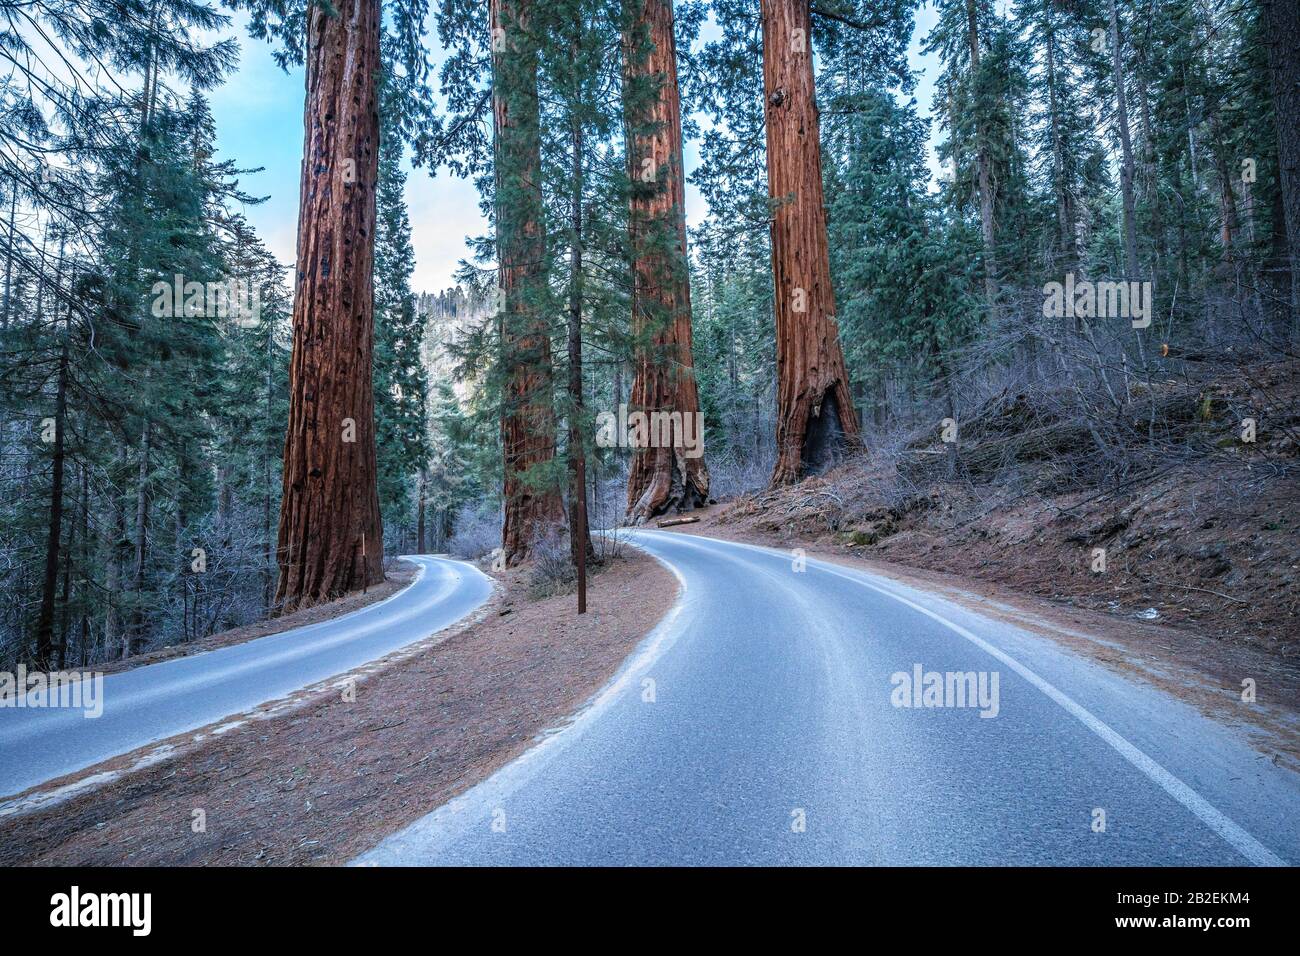 General's Highway goes between the four guardsmen giant sequoia trees in Sequoia National Park, California Stock Photo